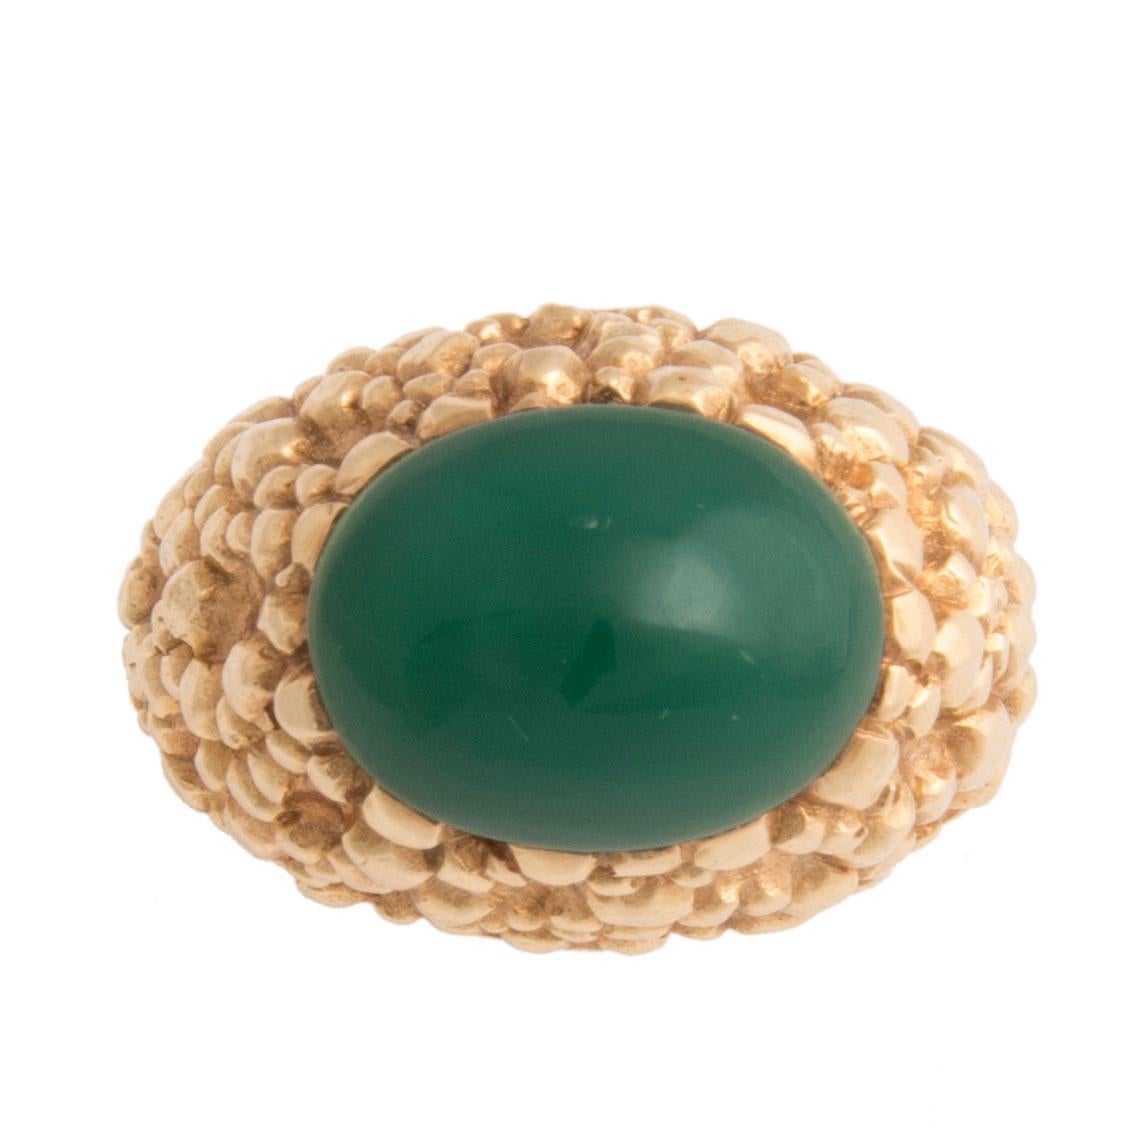 Van Cleef & Arpels ring, textured 18k gold with a Chrysoprase cabochon.
Ring size 6.5
Signed VCA, marked OR750, makers mark, French hallmark
Circa 1970s